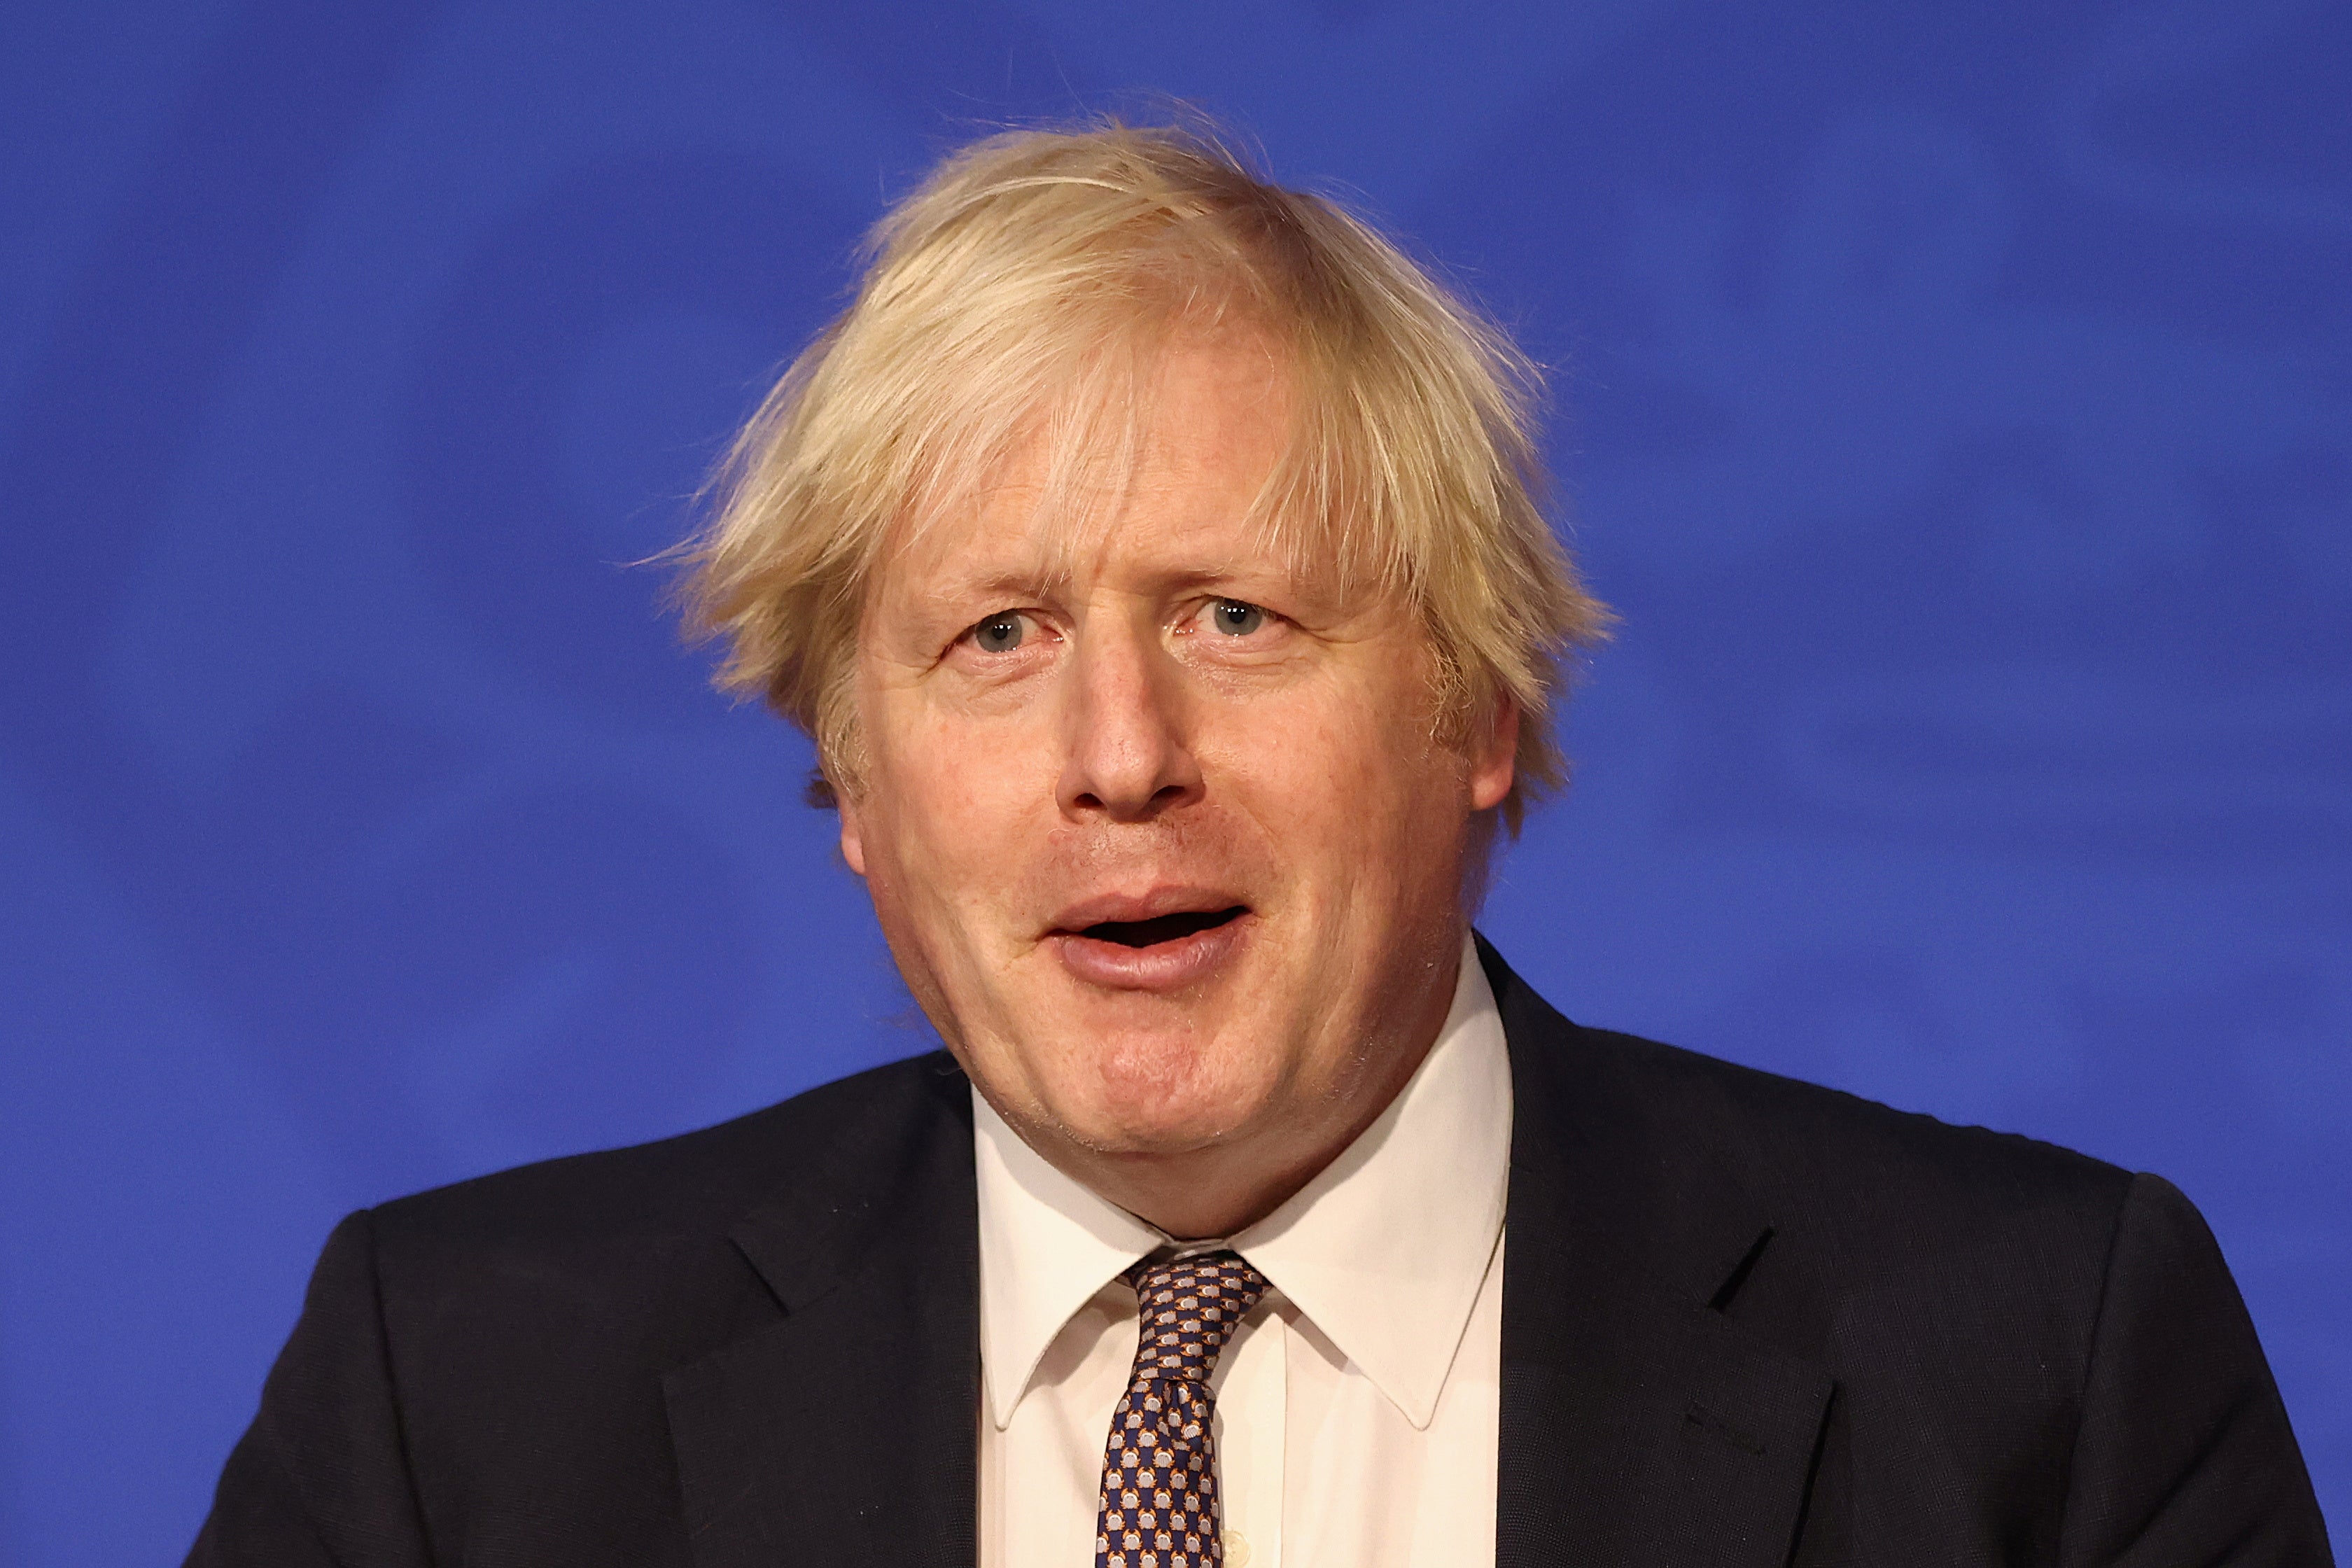 Johnson was asked about the allegations against the whips – he said he had ‘seen no evidence’ of such a thing